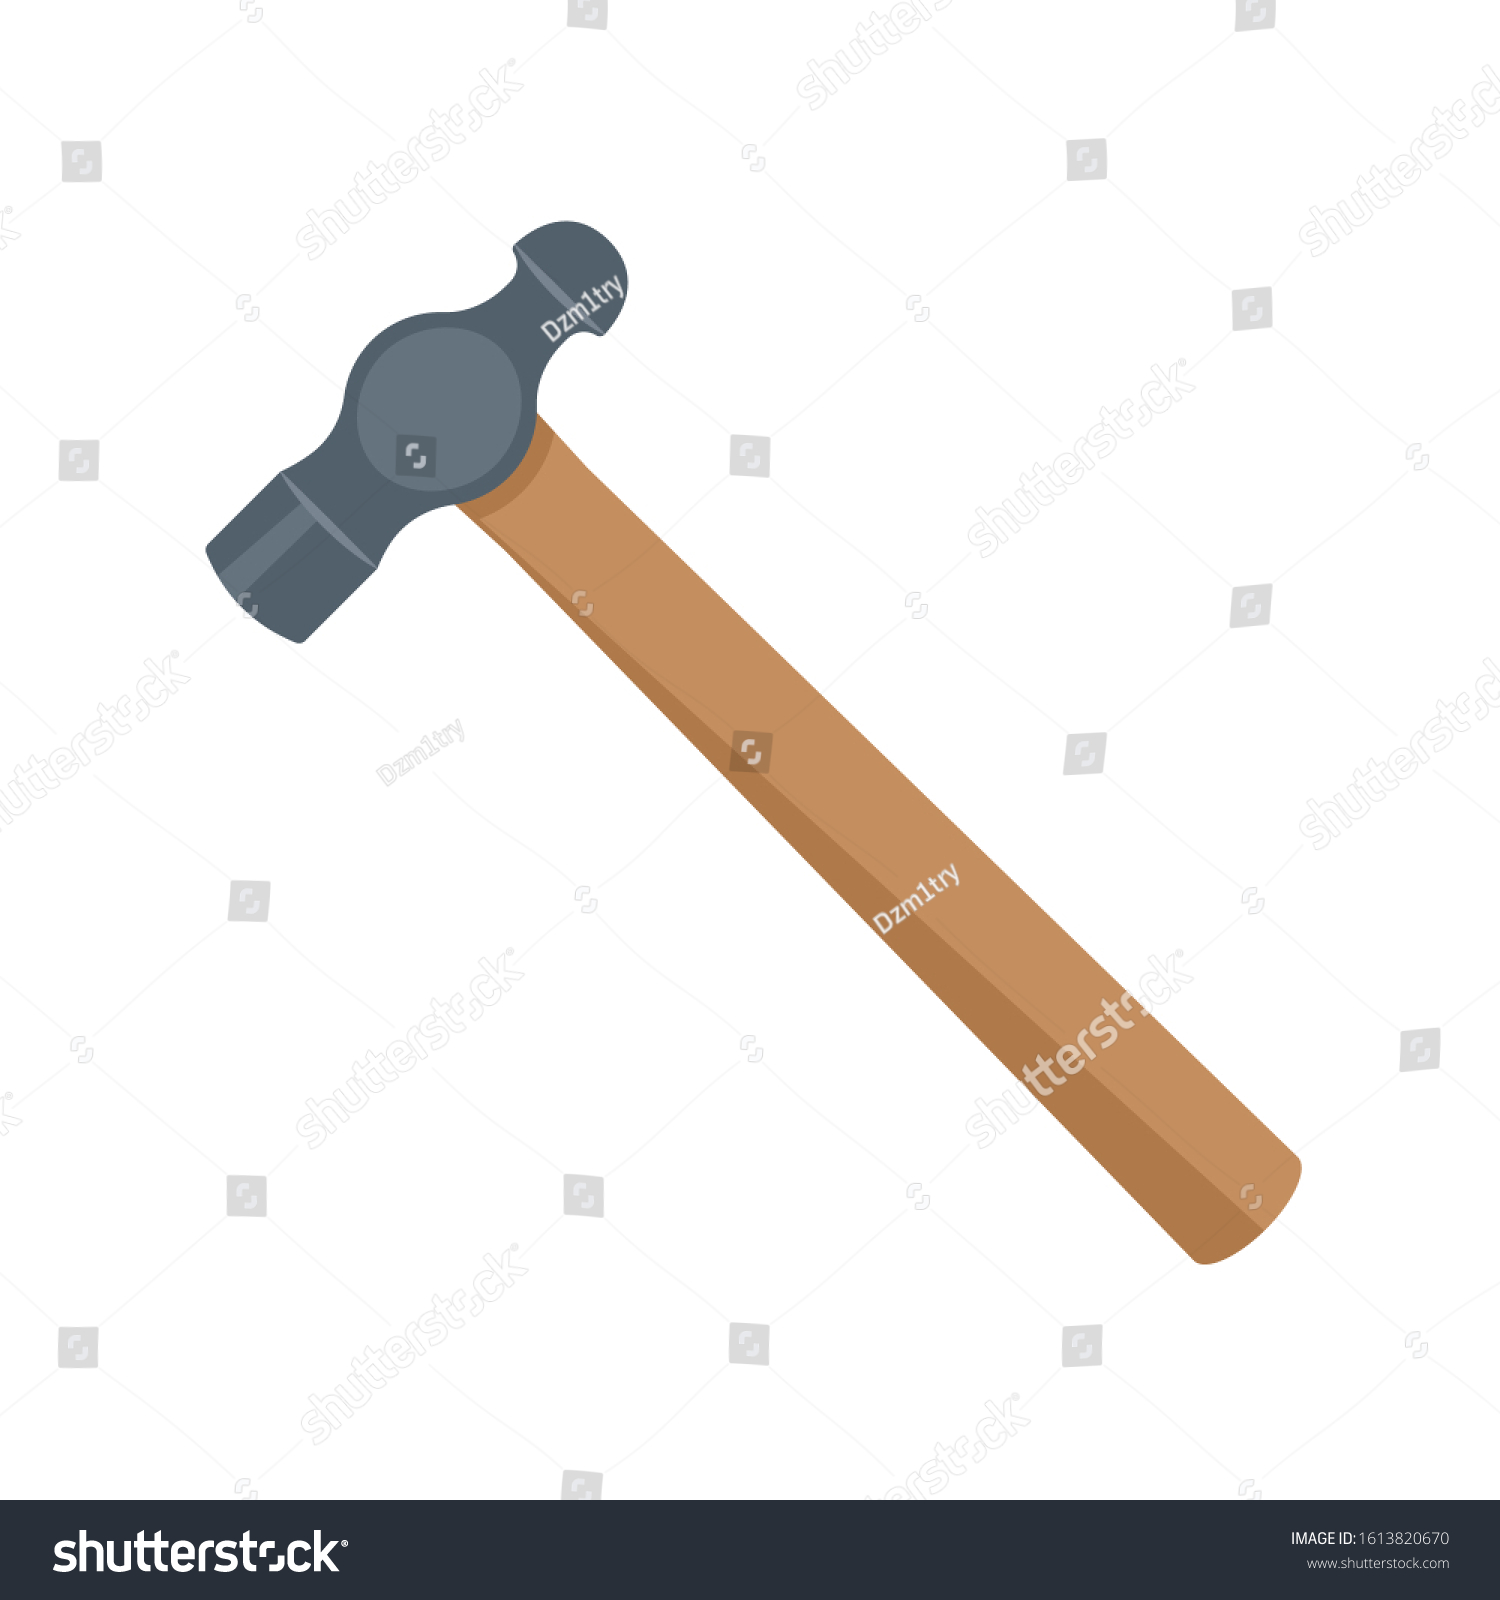 SVG of Ball peen hammer icon. Clipart image isolated on white background svg